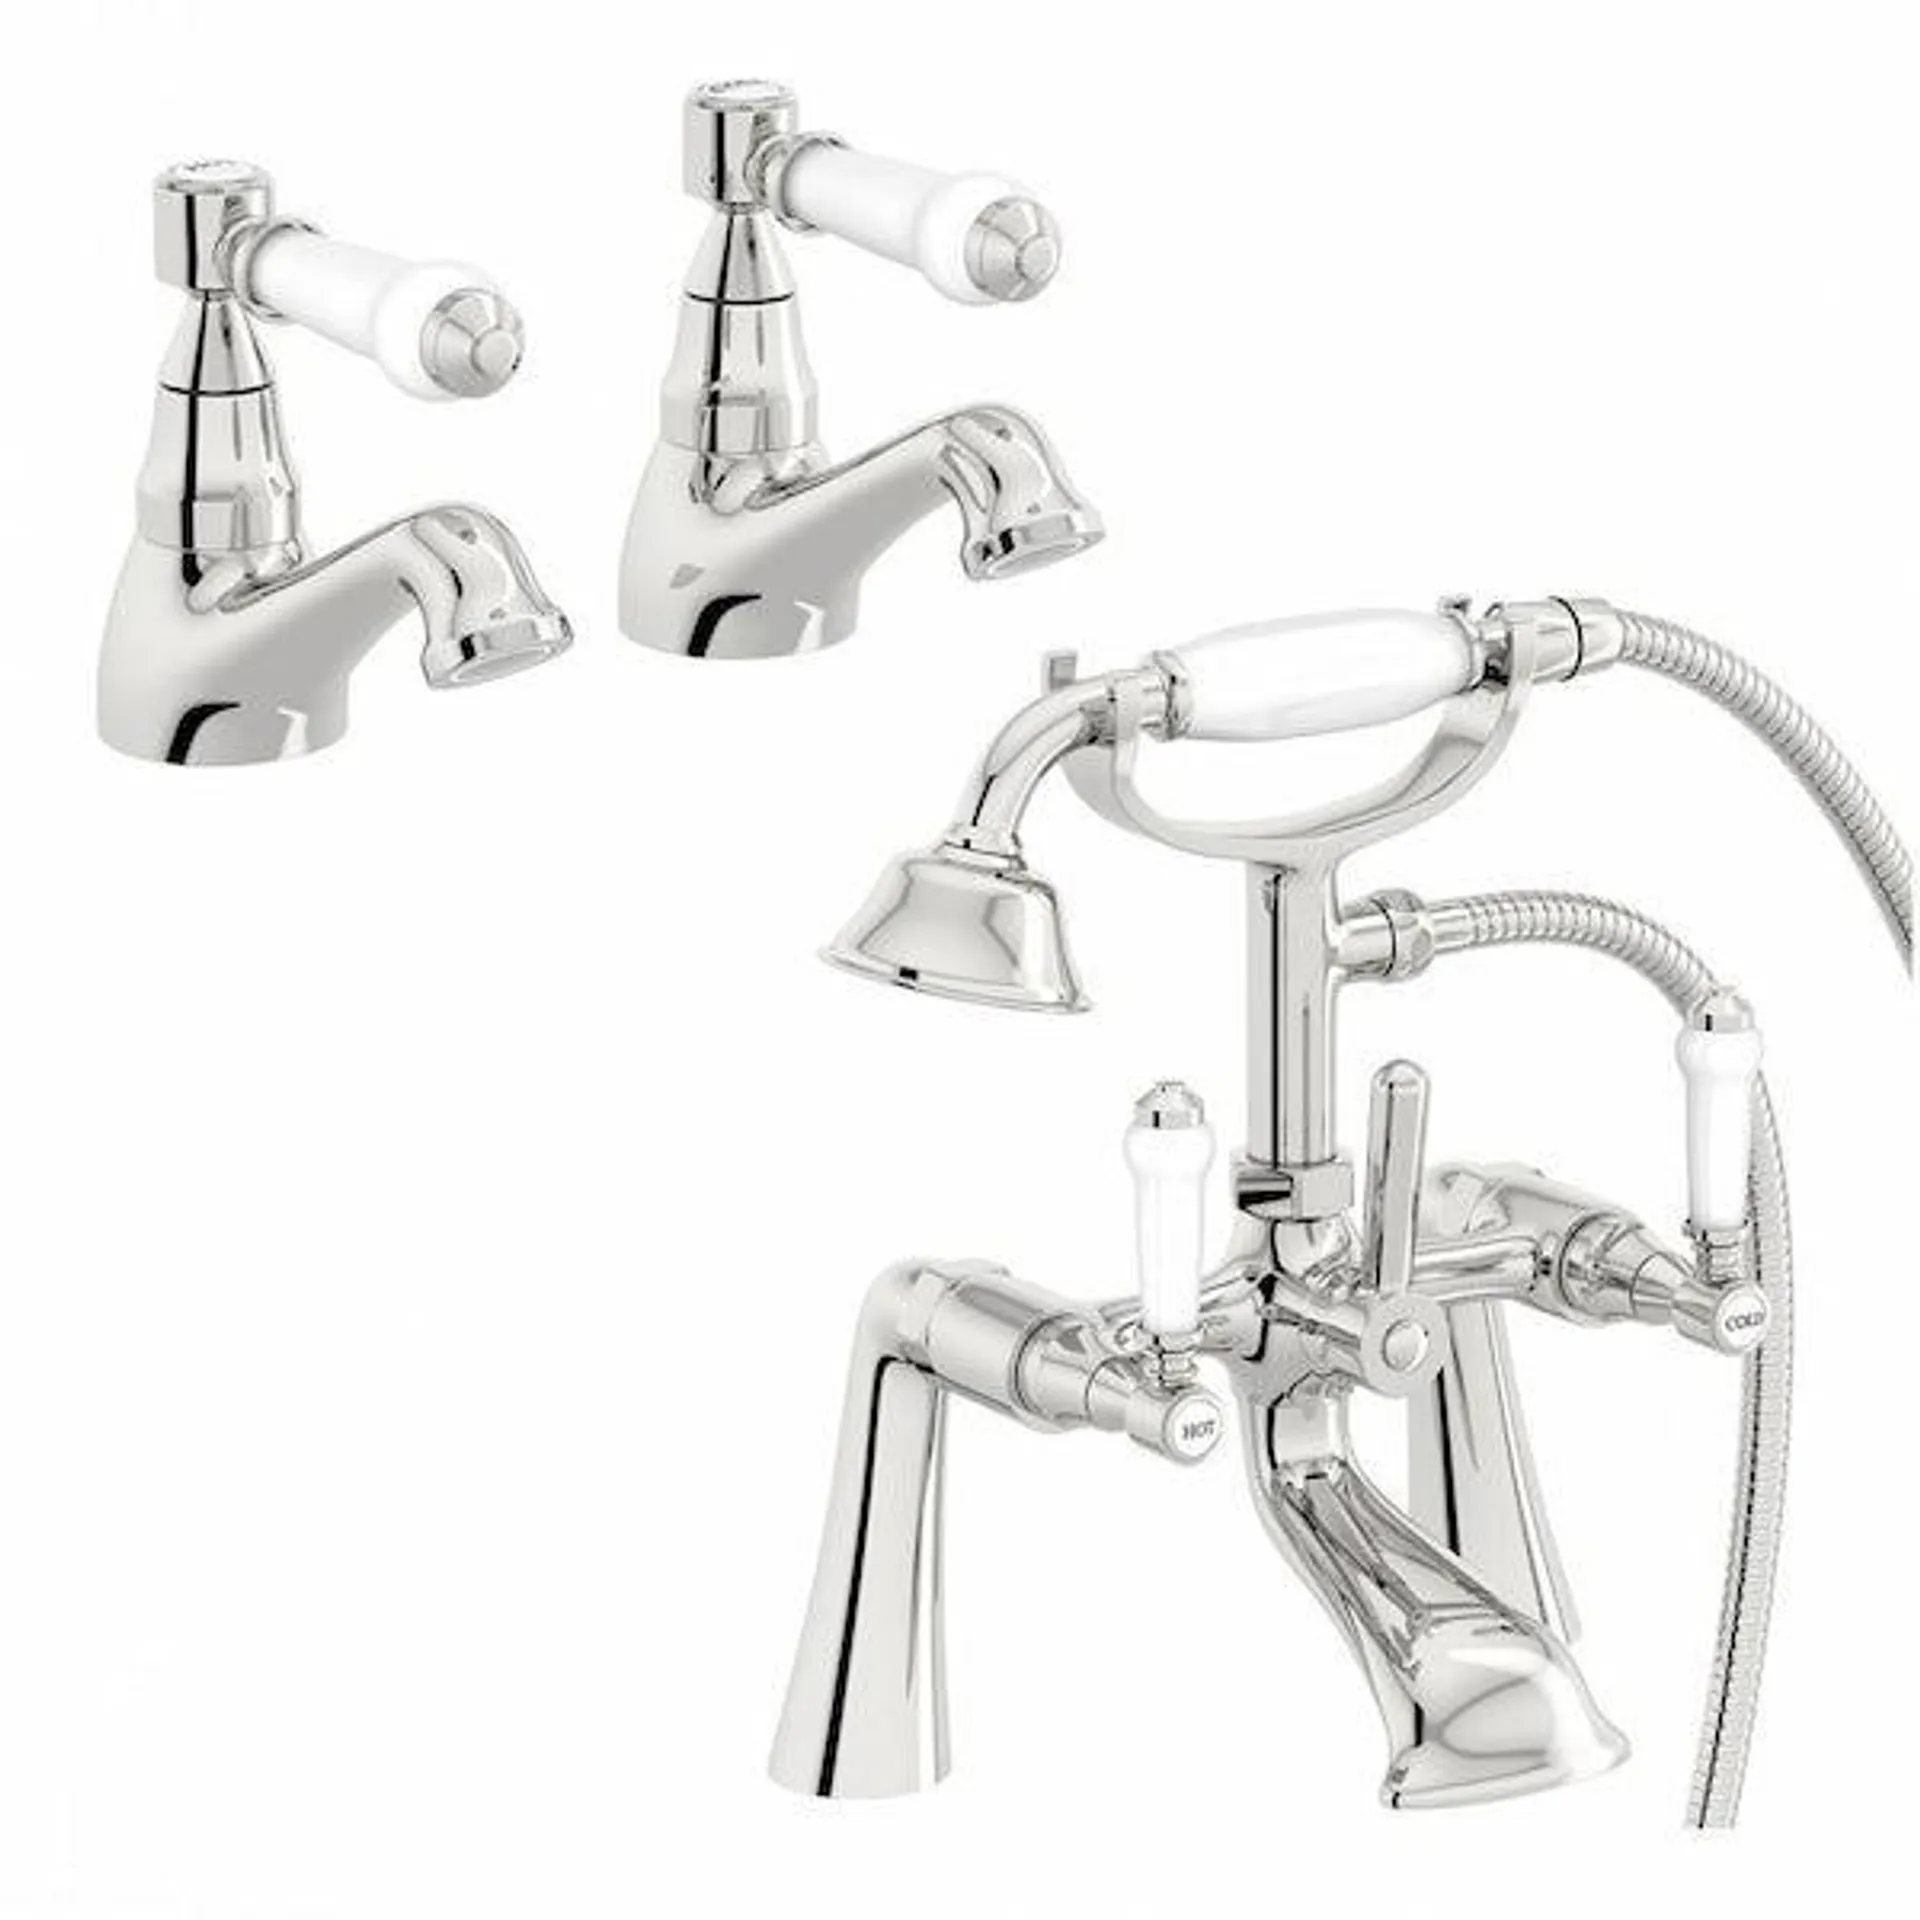 Orchard Winchester basin tap and bath shower mixer tap pack